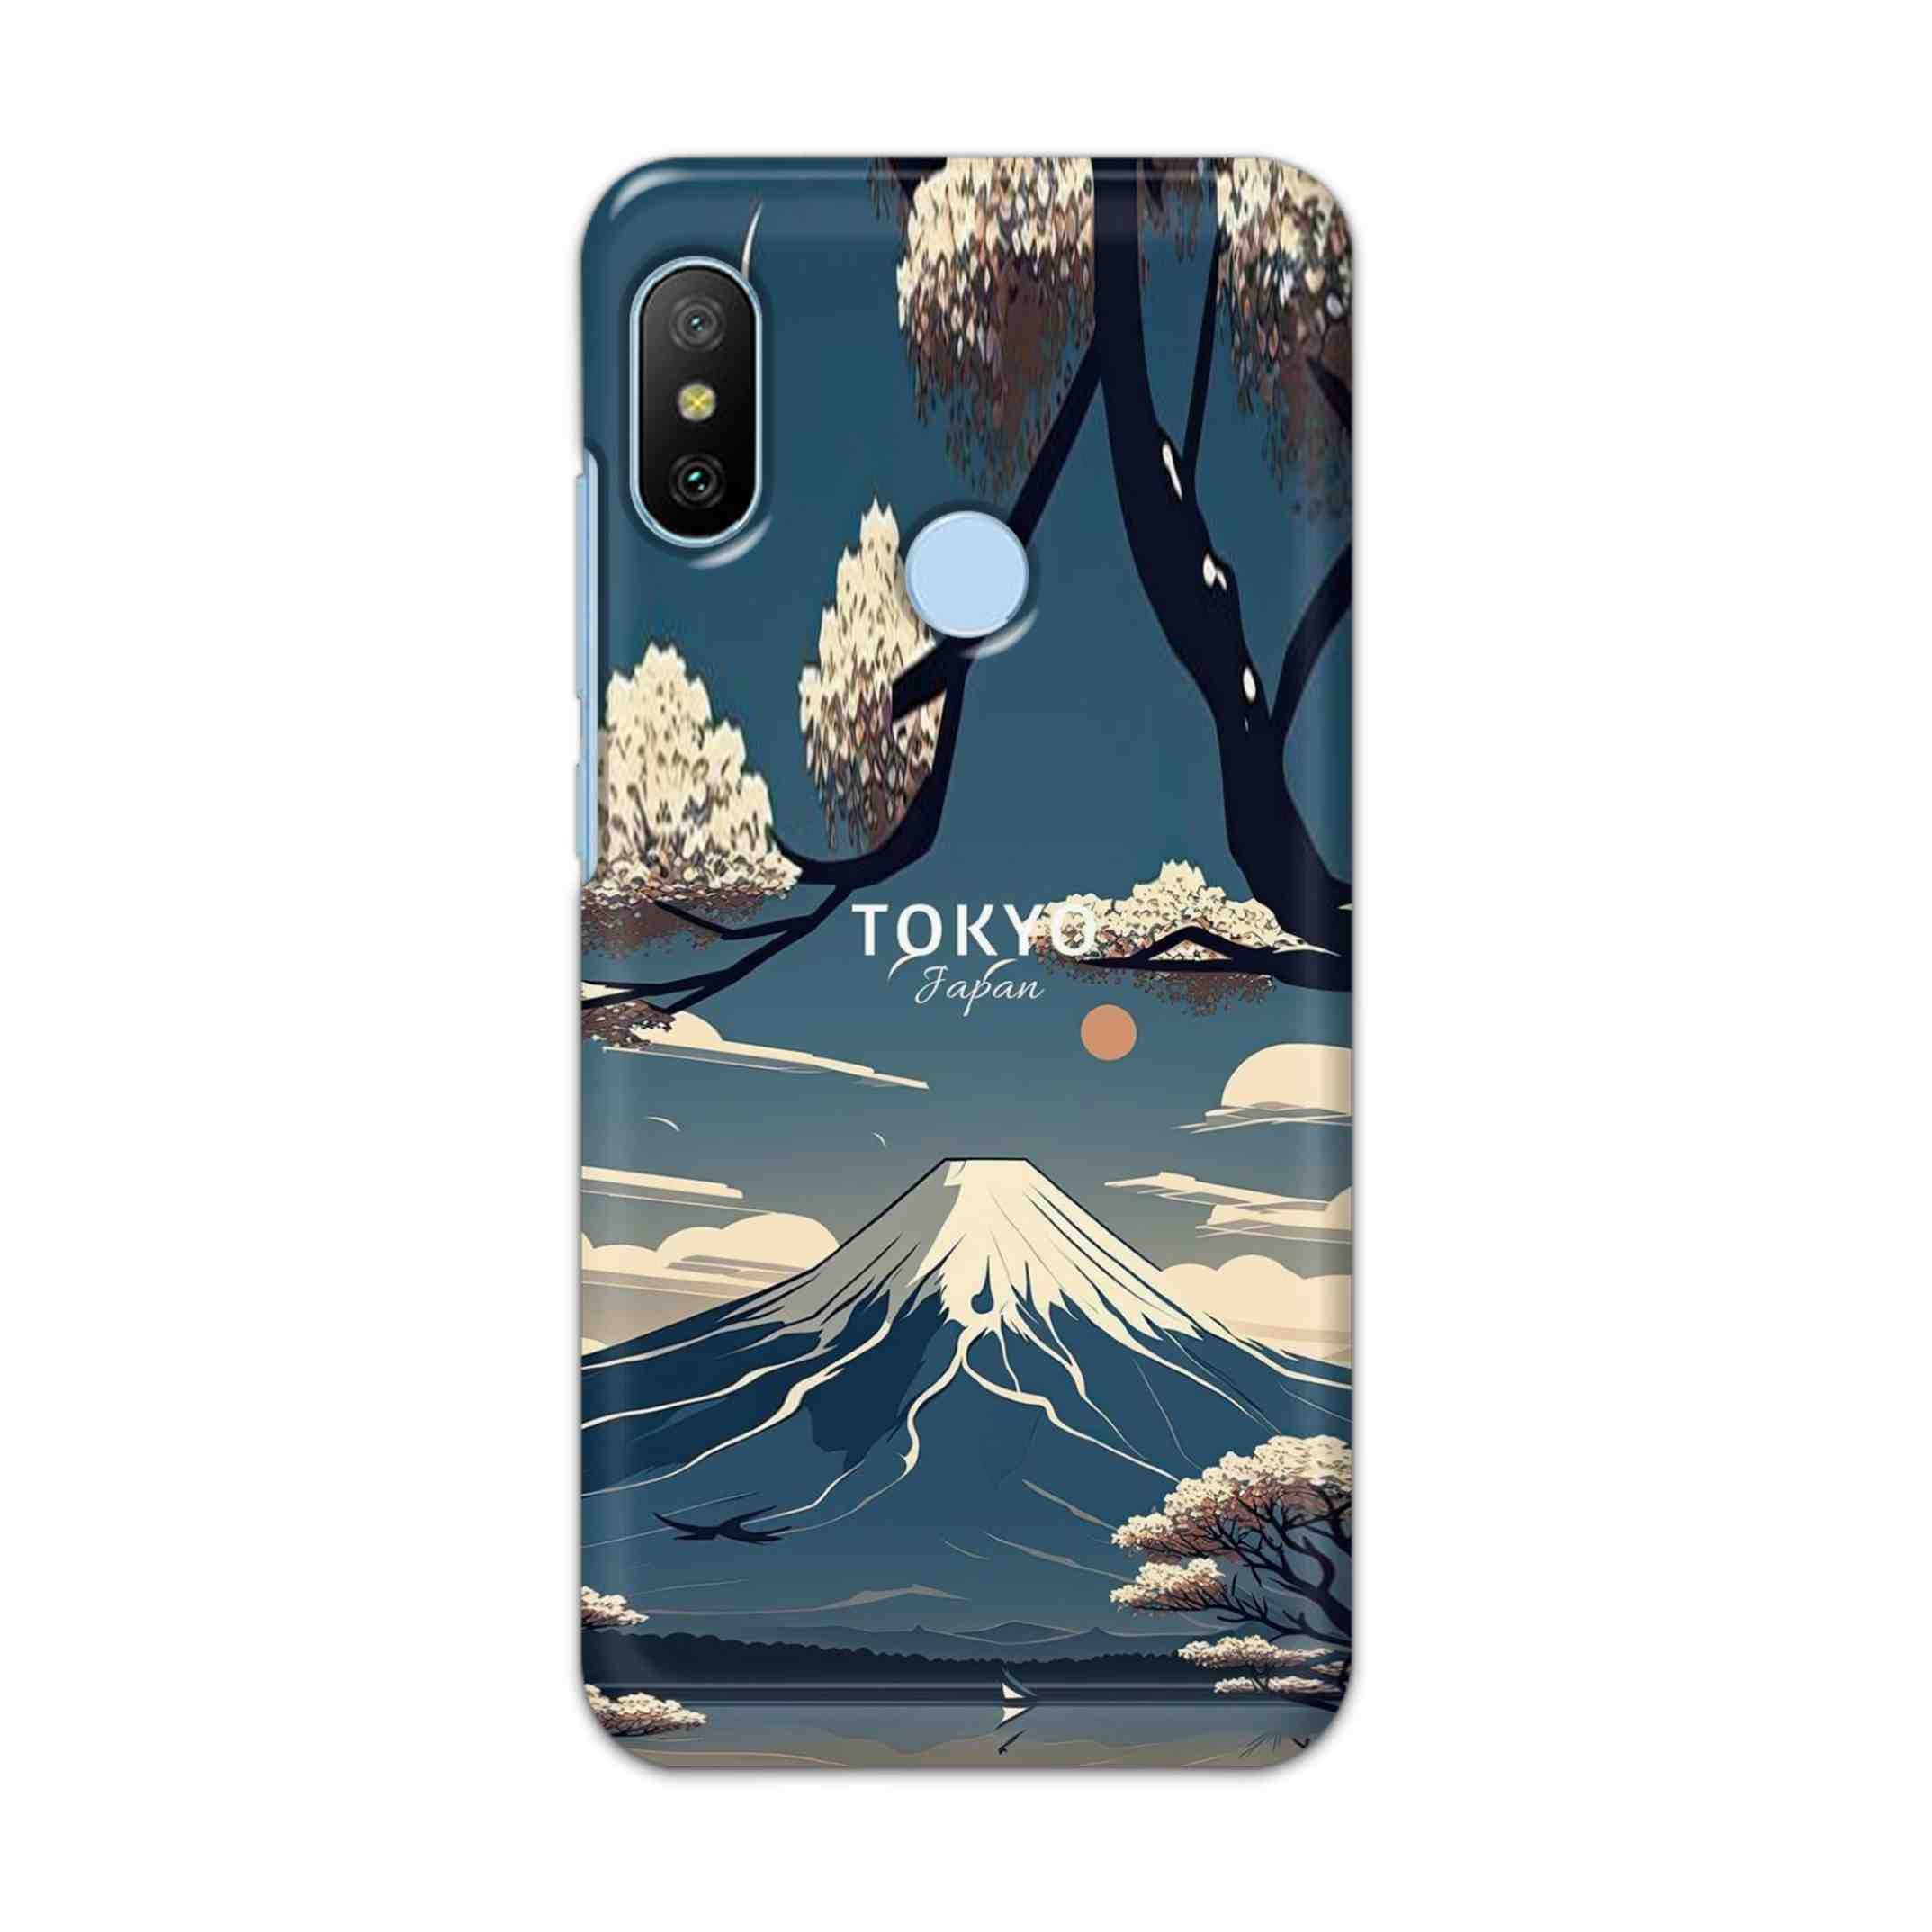 Buy Tokyo Hard Back Mobile Phone Case/Cover For Xiaomi A2 / 6X Online